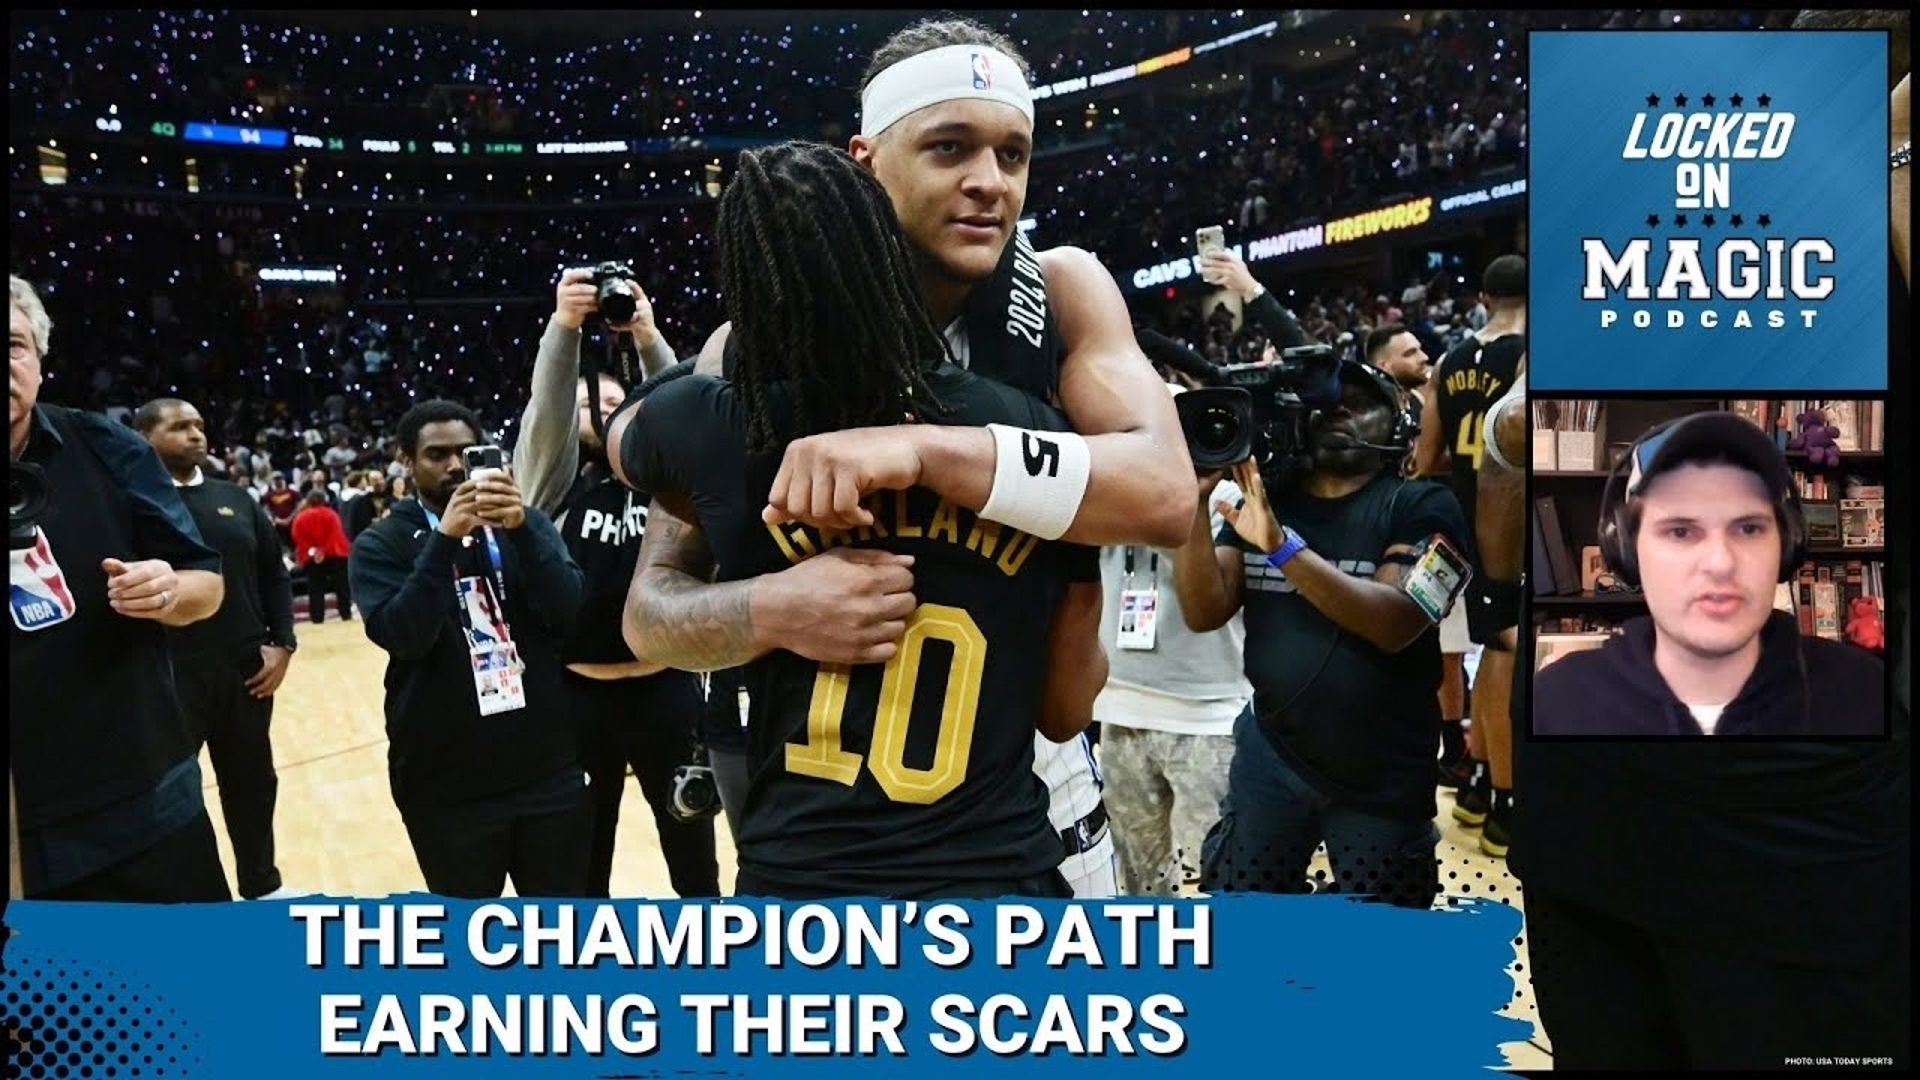 A new generation is taking over in the NBA as the conference finalists are proving. But they got there through years of Playoff scars and failures.